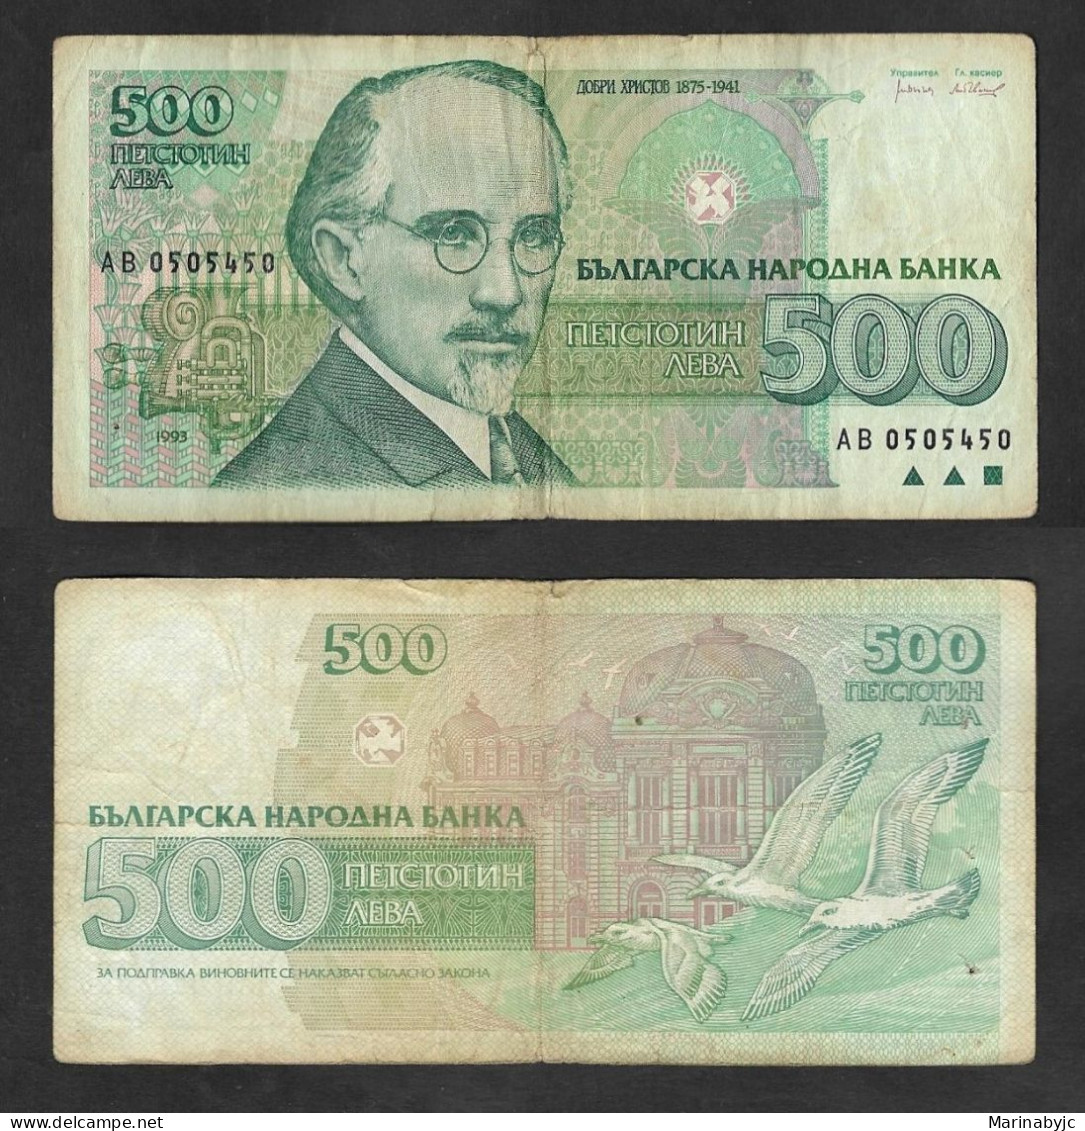 SE)1993 BULGARIA, 500 LEVA BANKNOTE OF THE CENTRAL BANK OF BULGARIA, WITH REVERSE, VF - Used Stamps